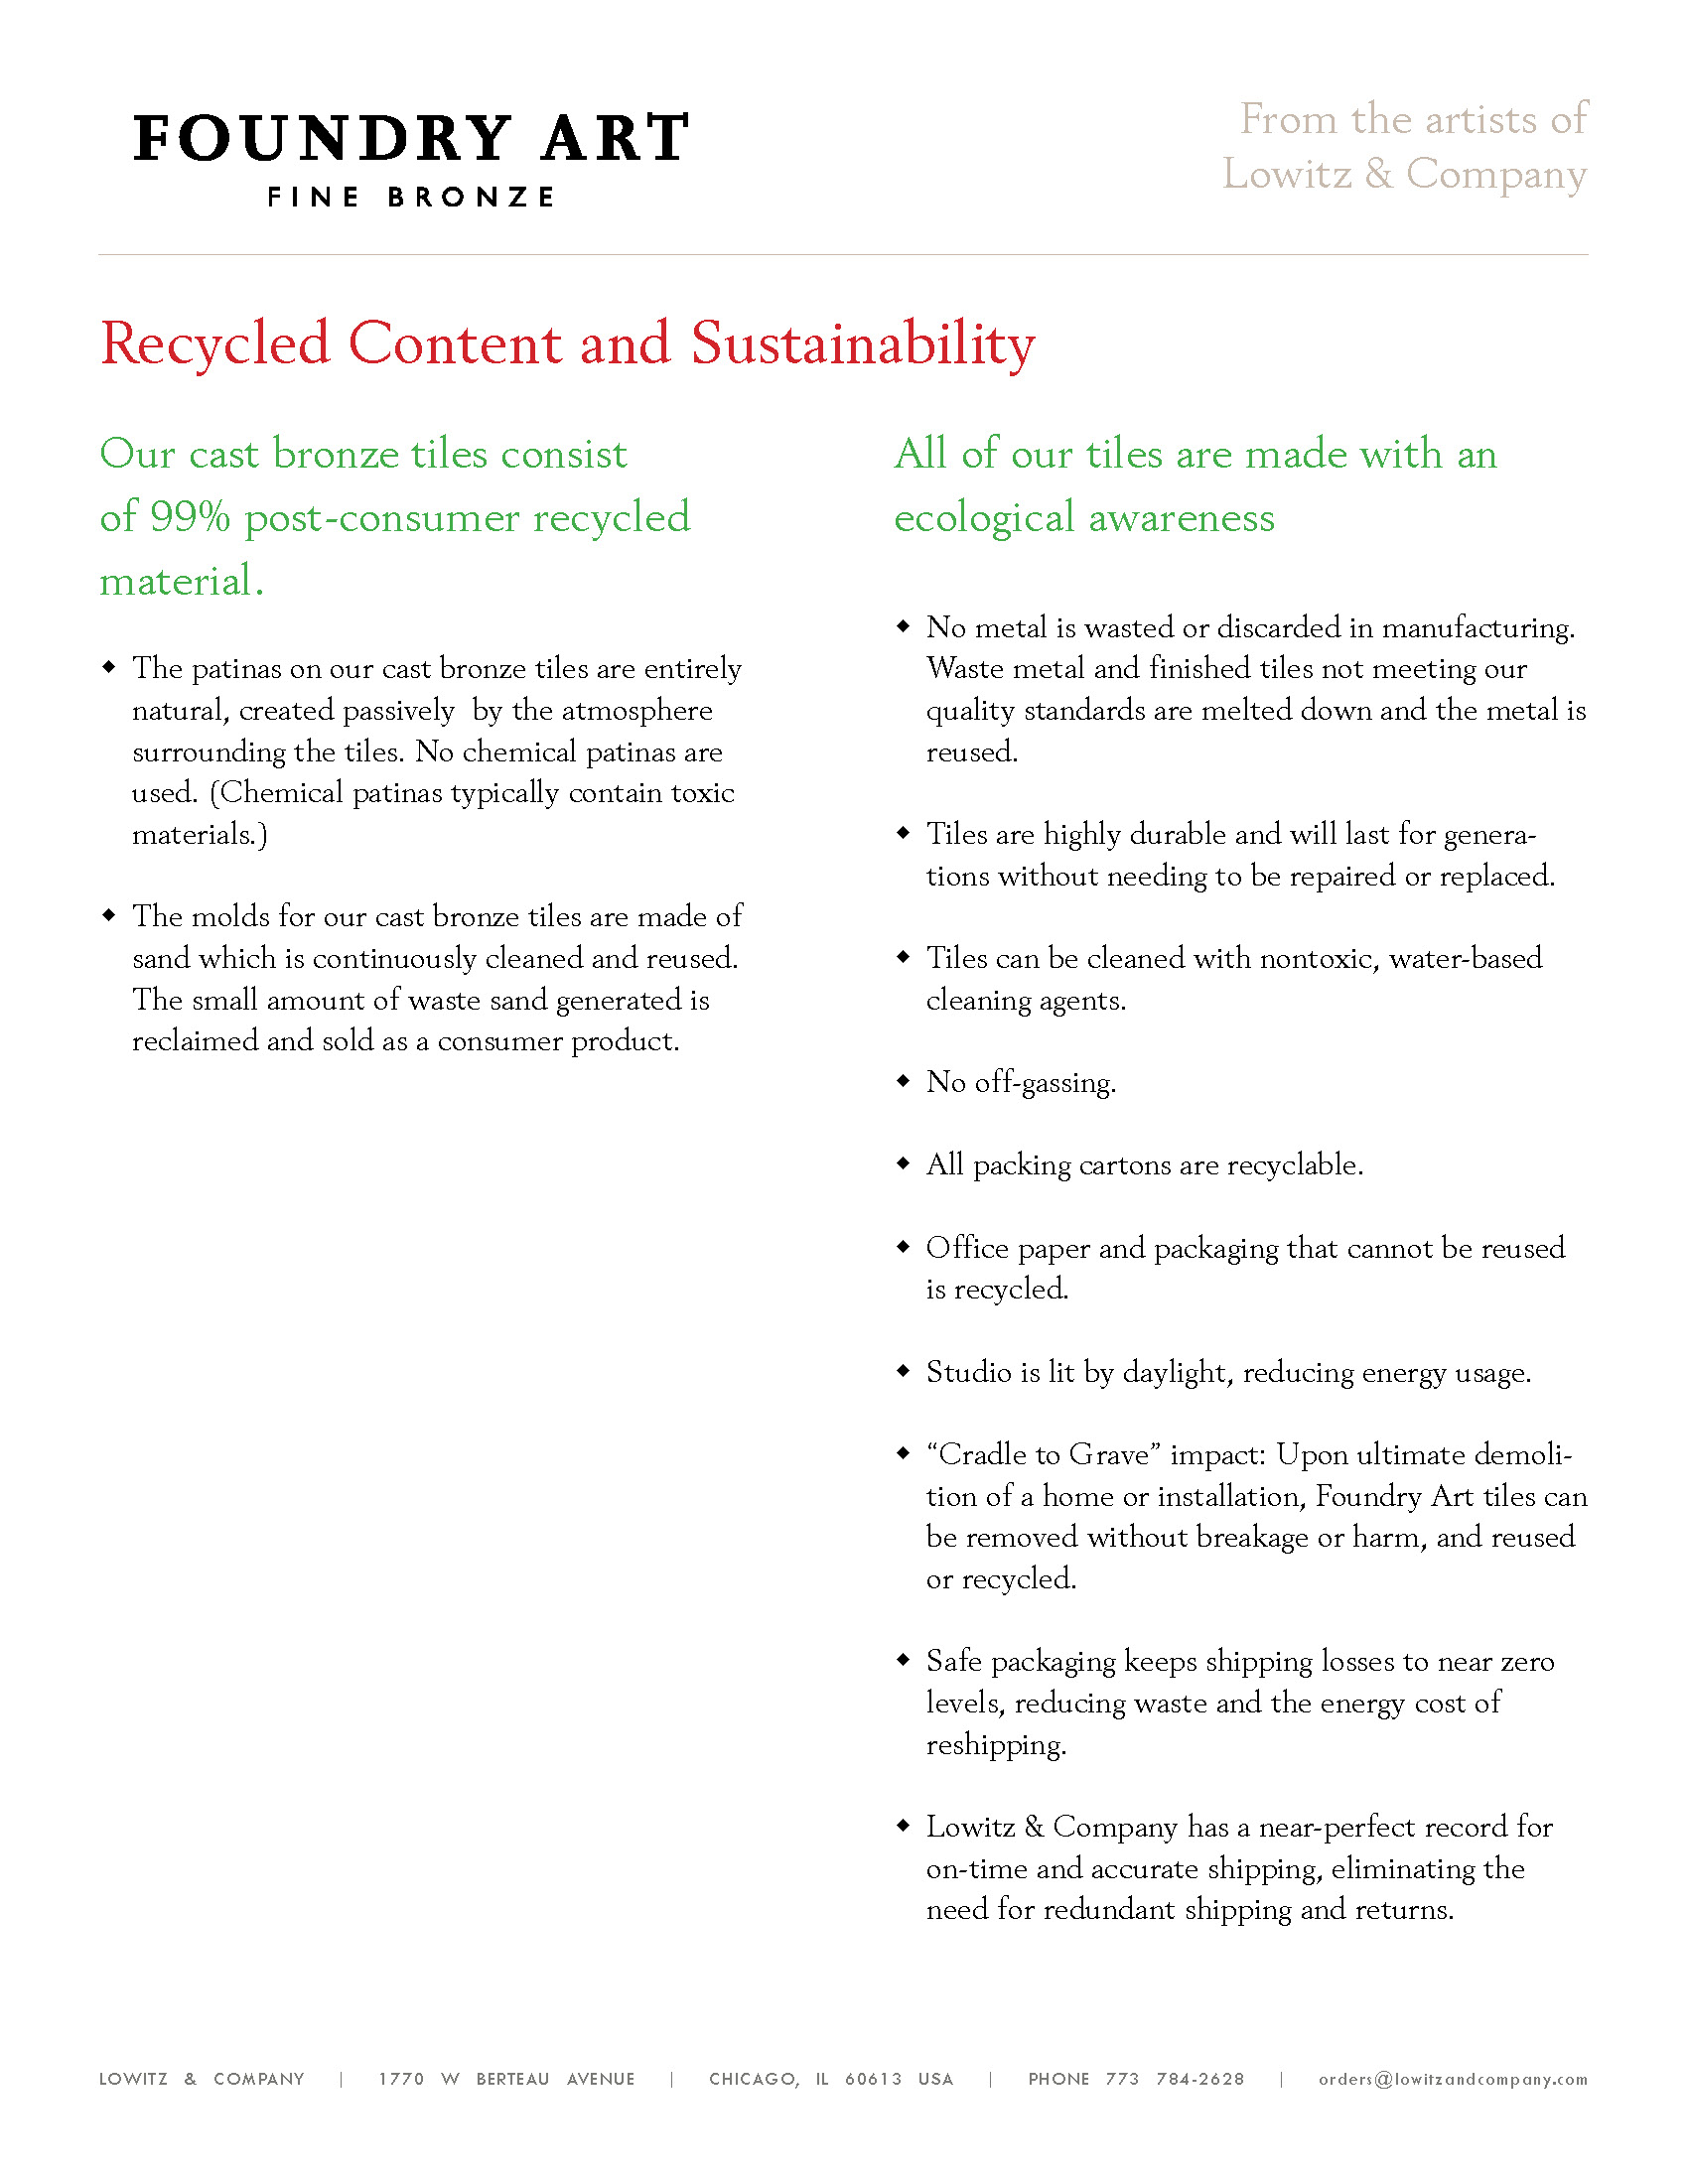 Recycled Content - Sustainability